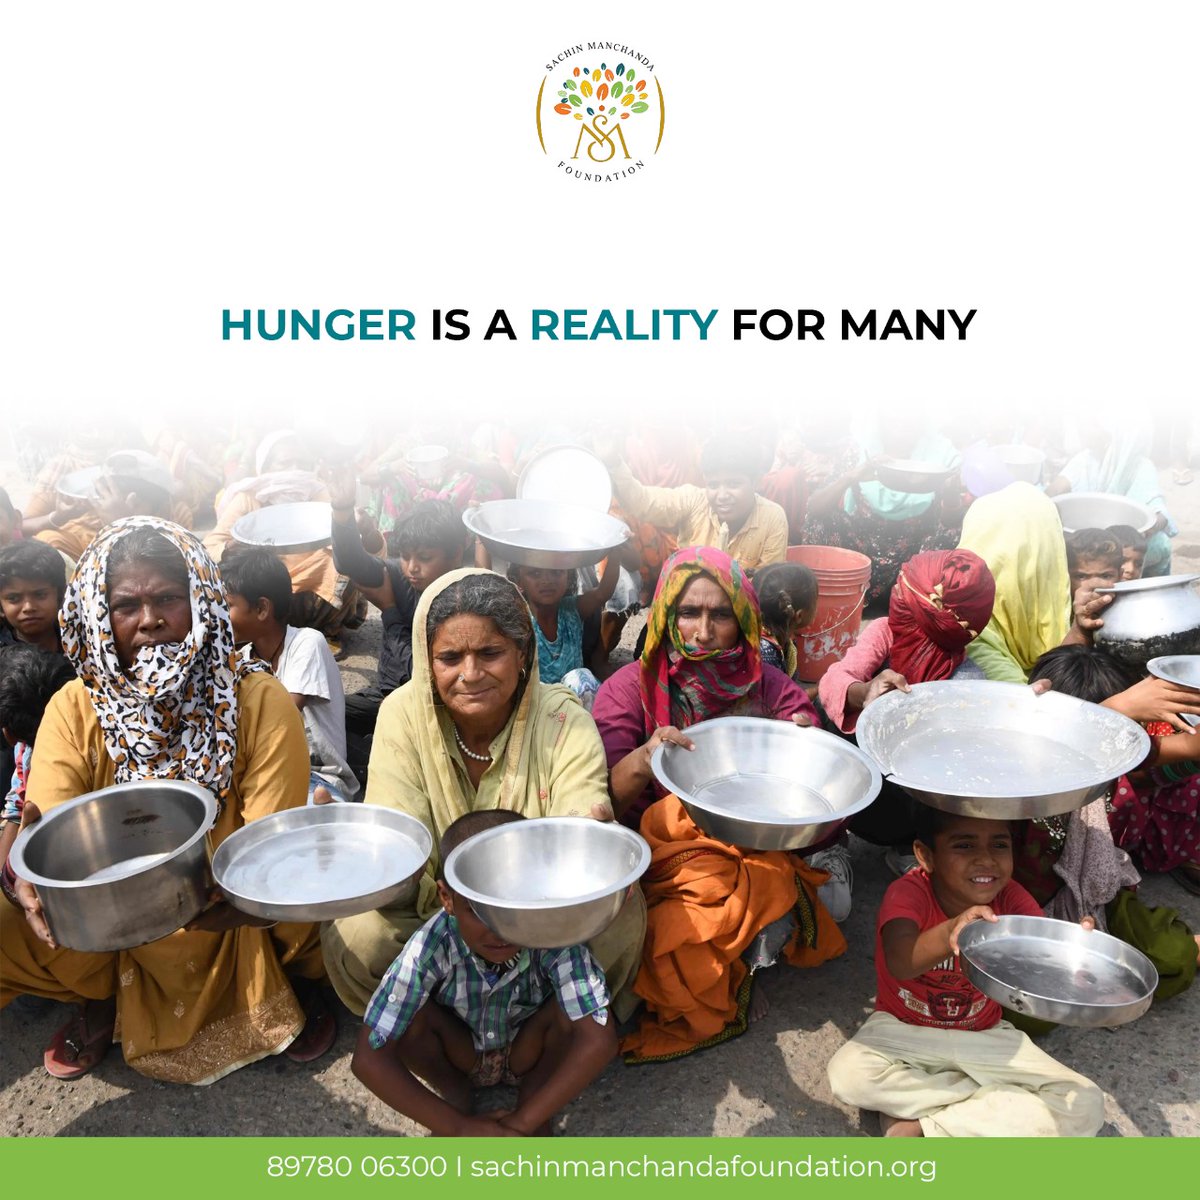 Let's come together to ensure that no one goes to bed #hungry and put a stop to this #social evil.

#SachinManchandaFoundation #SachinManchanda #SMFoundation #SMF #ManchandaFoundation 

#food #fooddistribution #donation #helppeople #helpingneedy #needypeople #poor #poorpeople